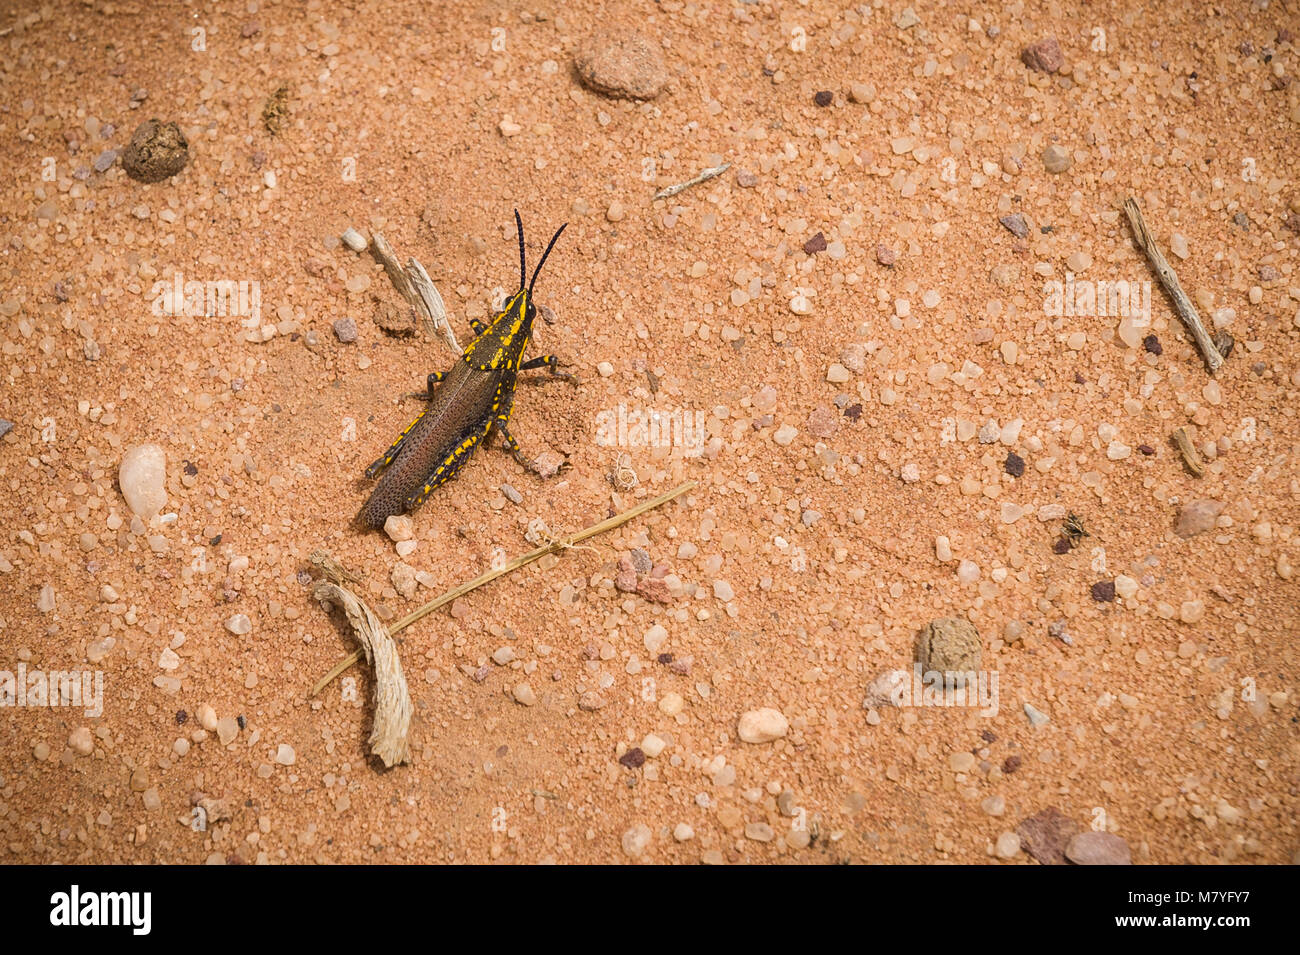 Grasshopper with yellow lines on his body found in the Wadi Rum desert in Jordan. Stock Photo